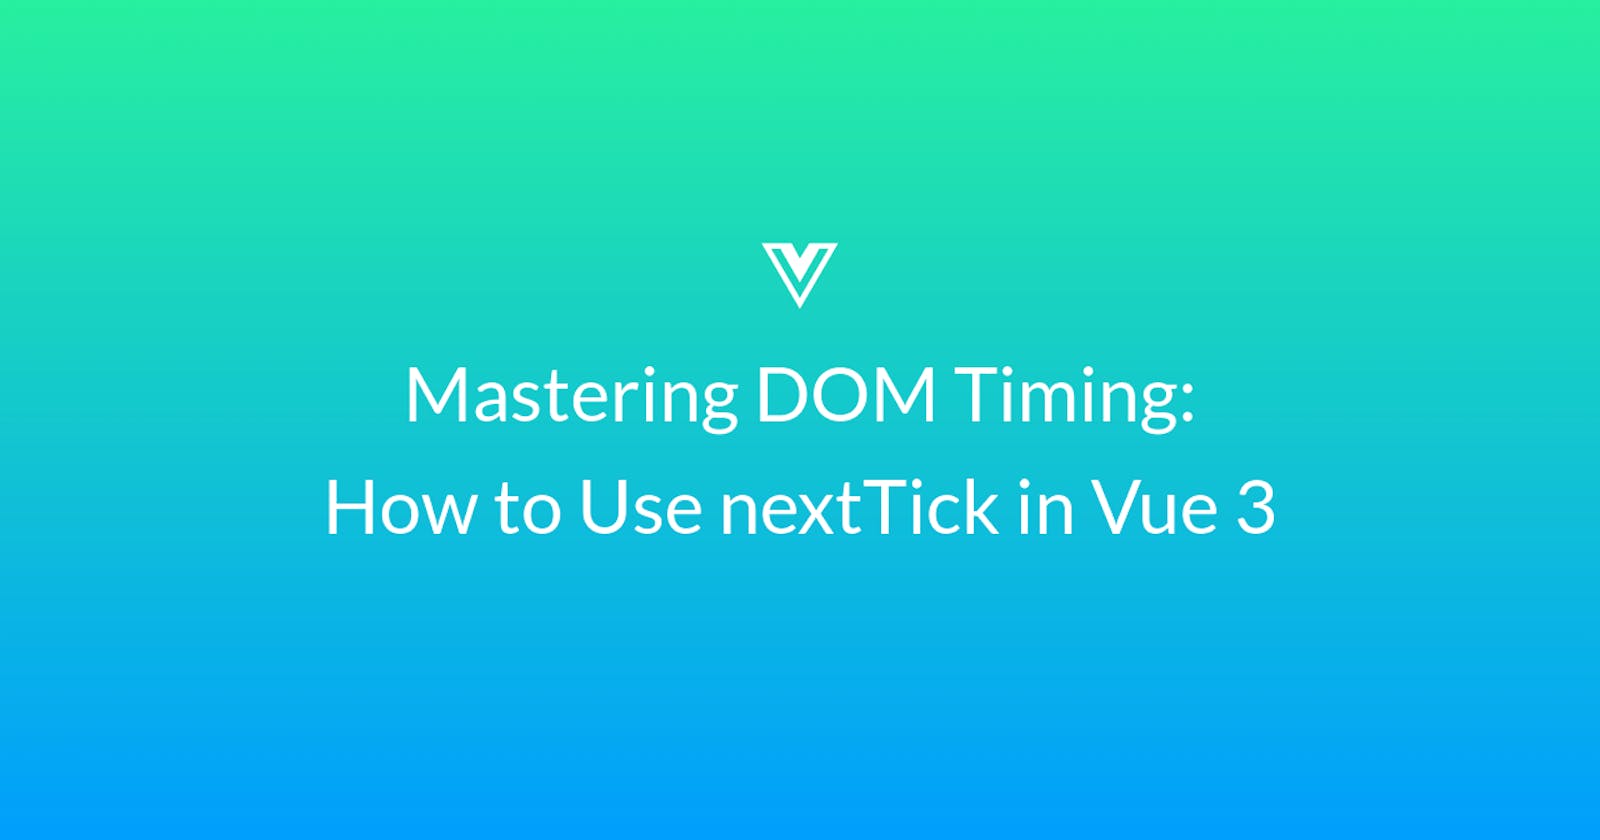 Mastering DOM Timing: How to Use nextTick in Vue 3